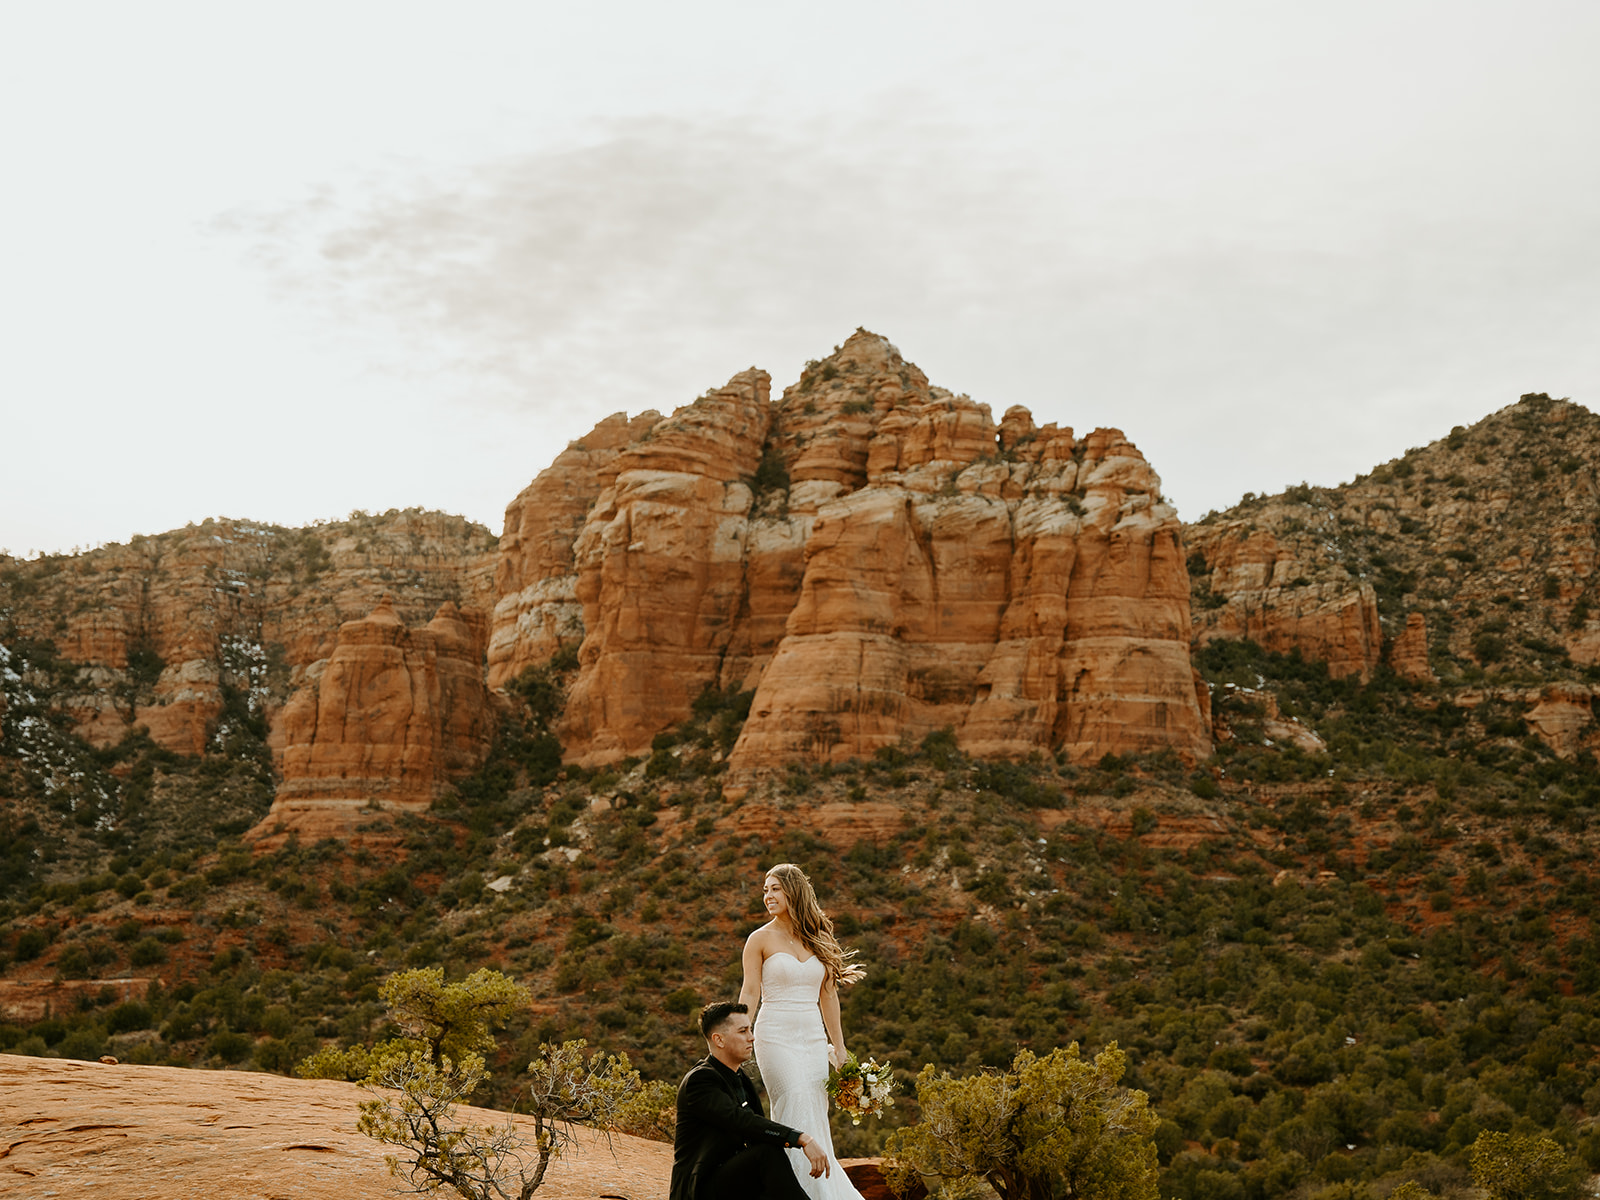 Wedding Photographers Reno capture bride and groom standing together on red rock in Arizona during adventure elopement